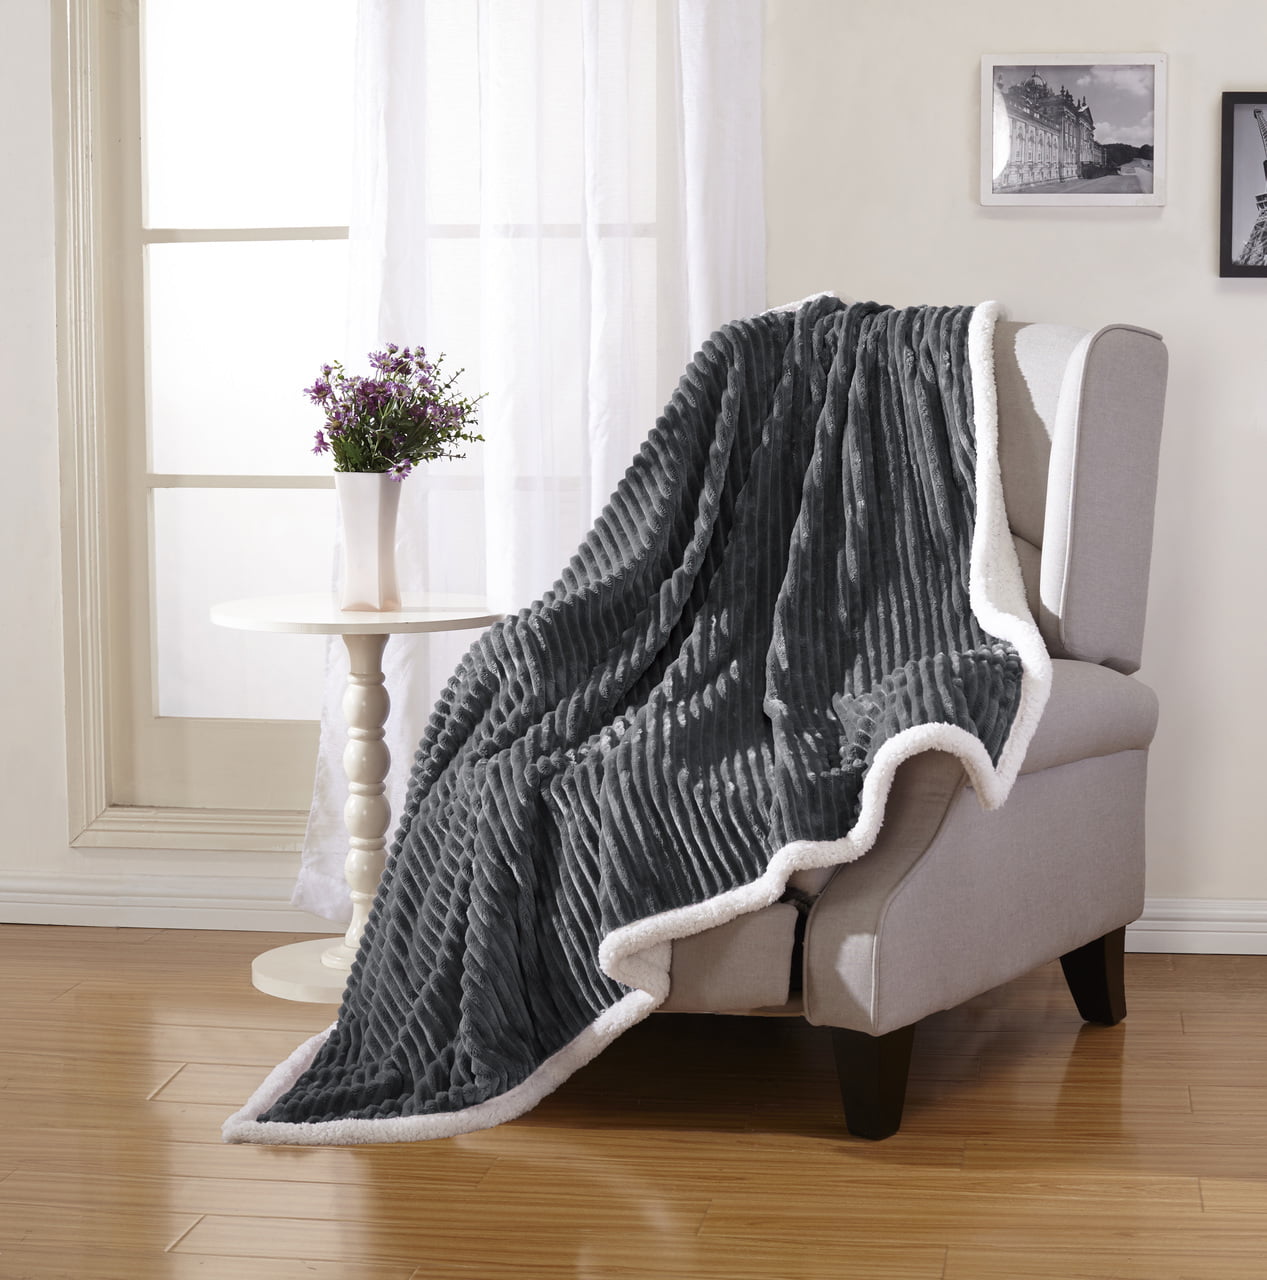 Details about   Genteele Sherpa Throw Blanket Super Soft Reversible Ultra Luxurious Plush Blanke 